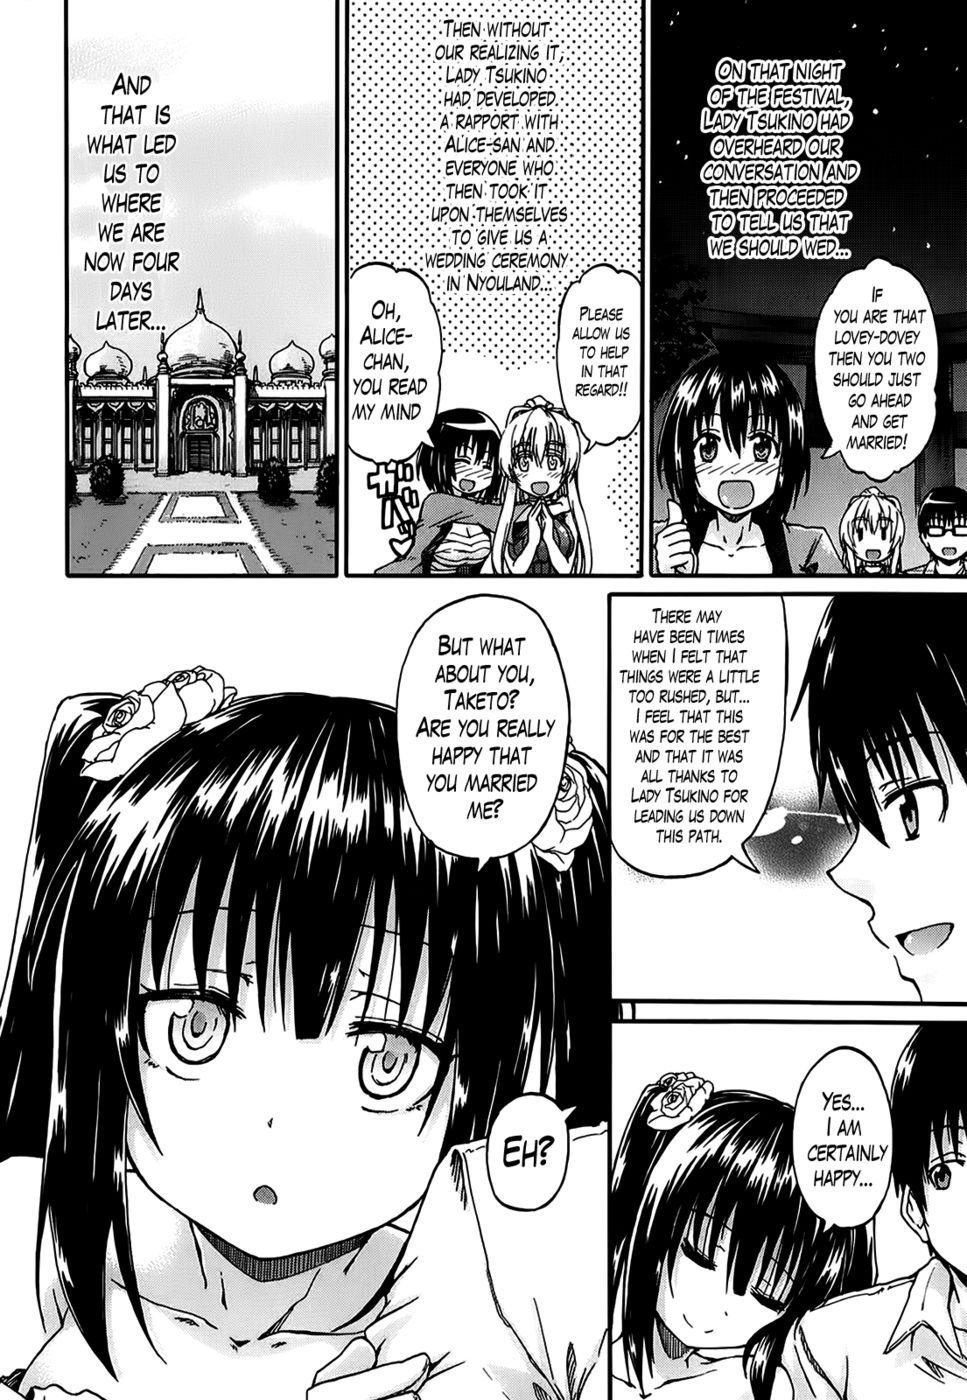 Hentai Manga Comic-I Am Falling in Love With Your Eyes-Chapter 4-6